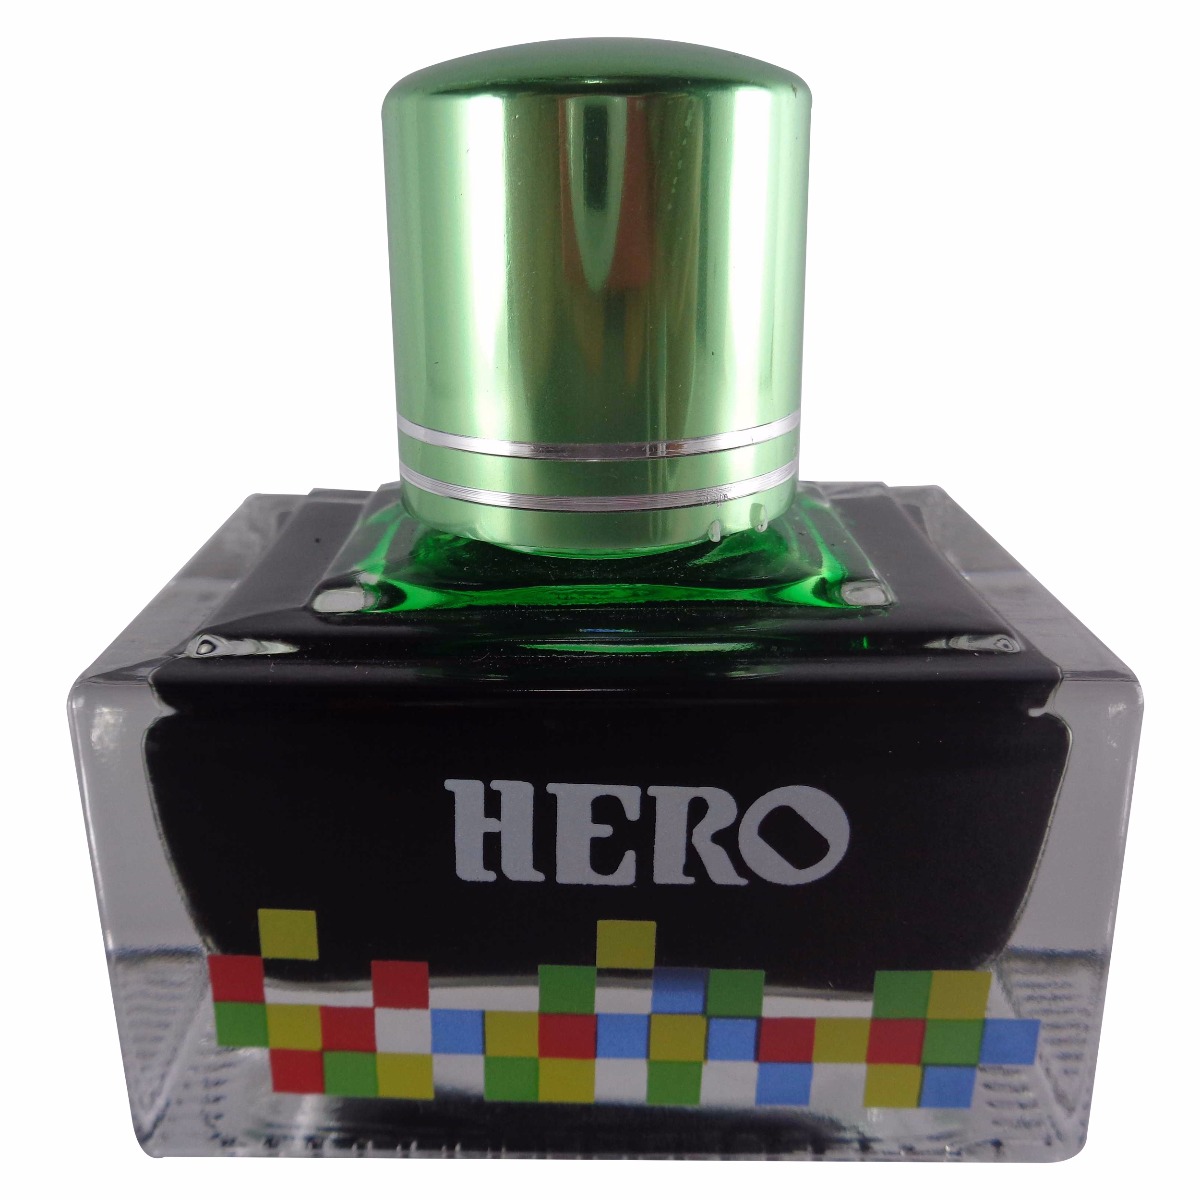 Hero No. 7108  Model: 70031 Extra color ink  Luminous Green color ink bottle